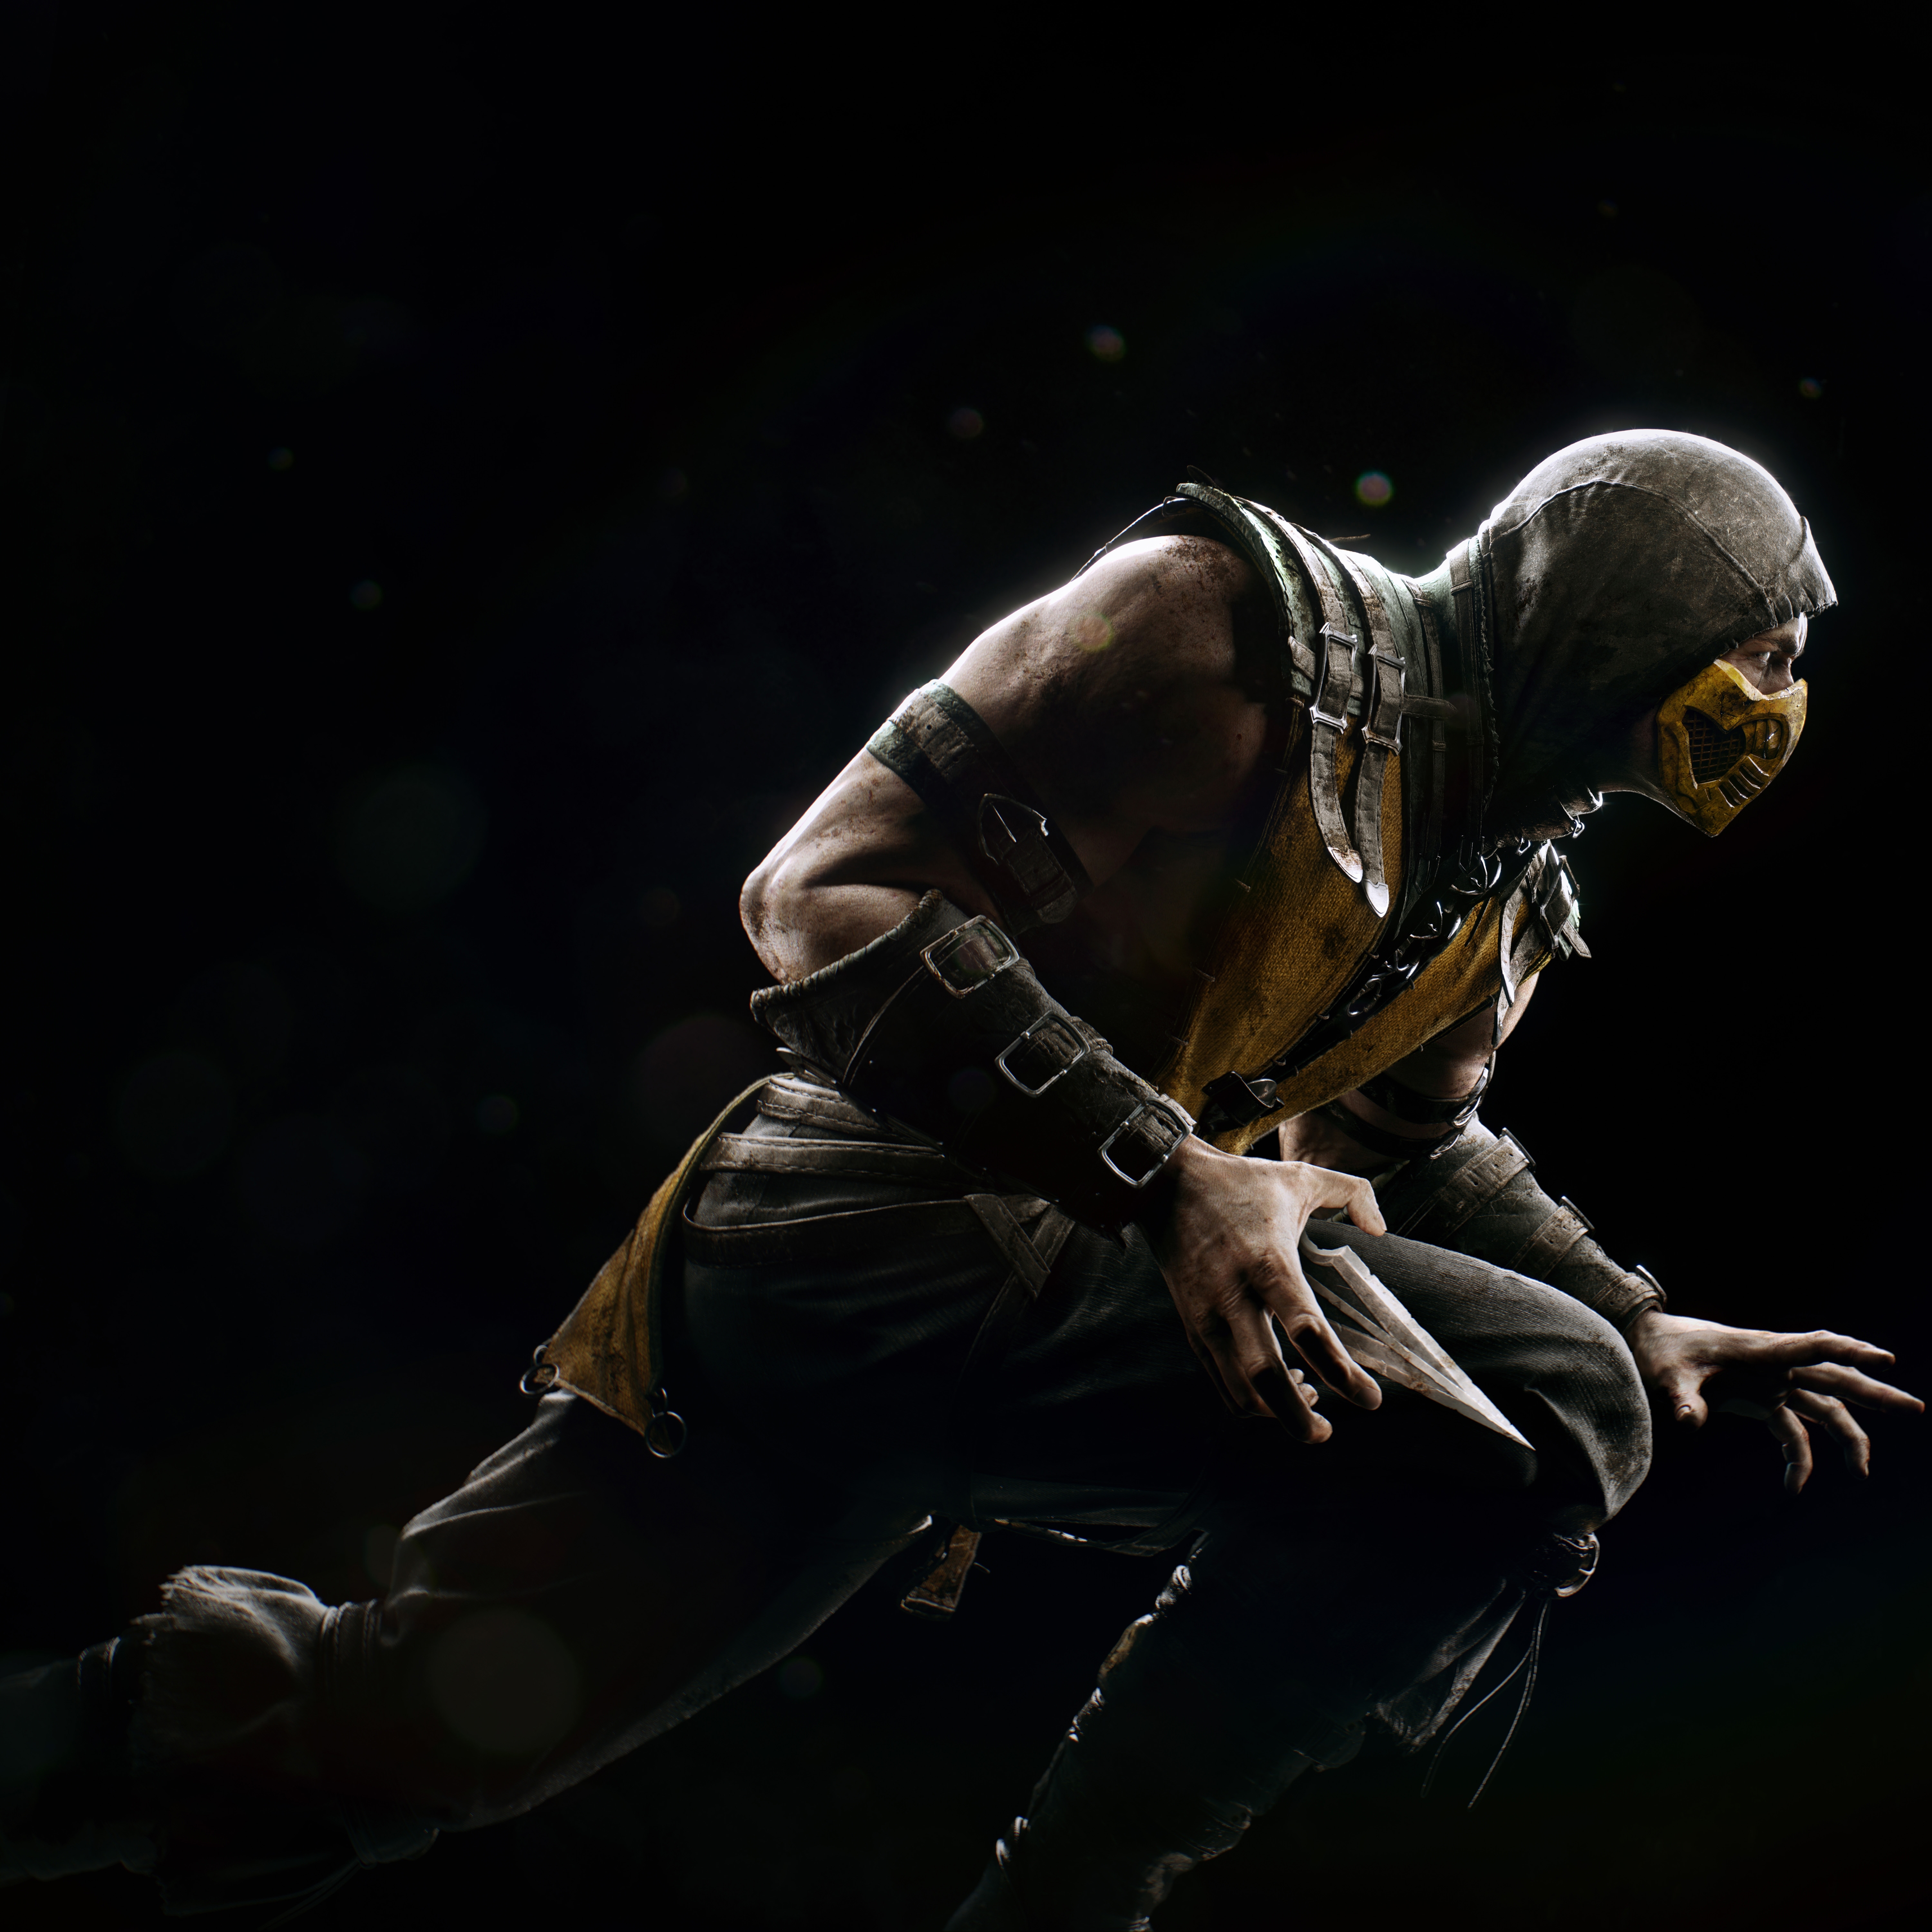 HD wallpaper, Ios Games, Mortal Kombat X, 5K, Scorpion, Black Background, Playstation 4, Pc Games, Android, Xbox One